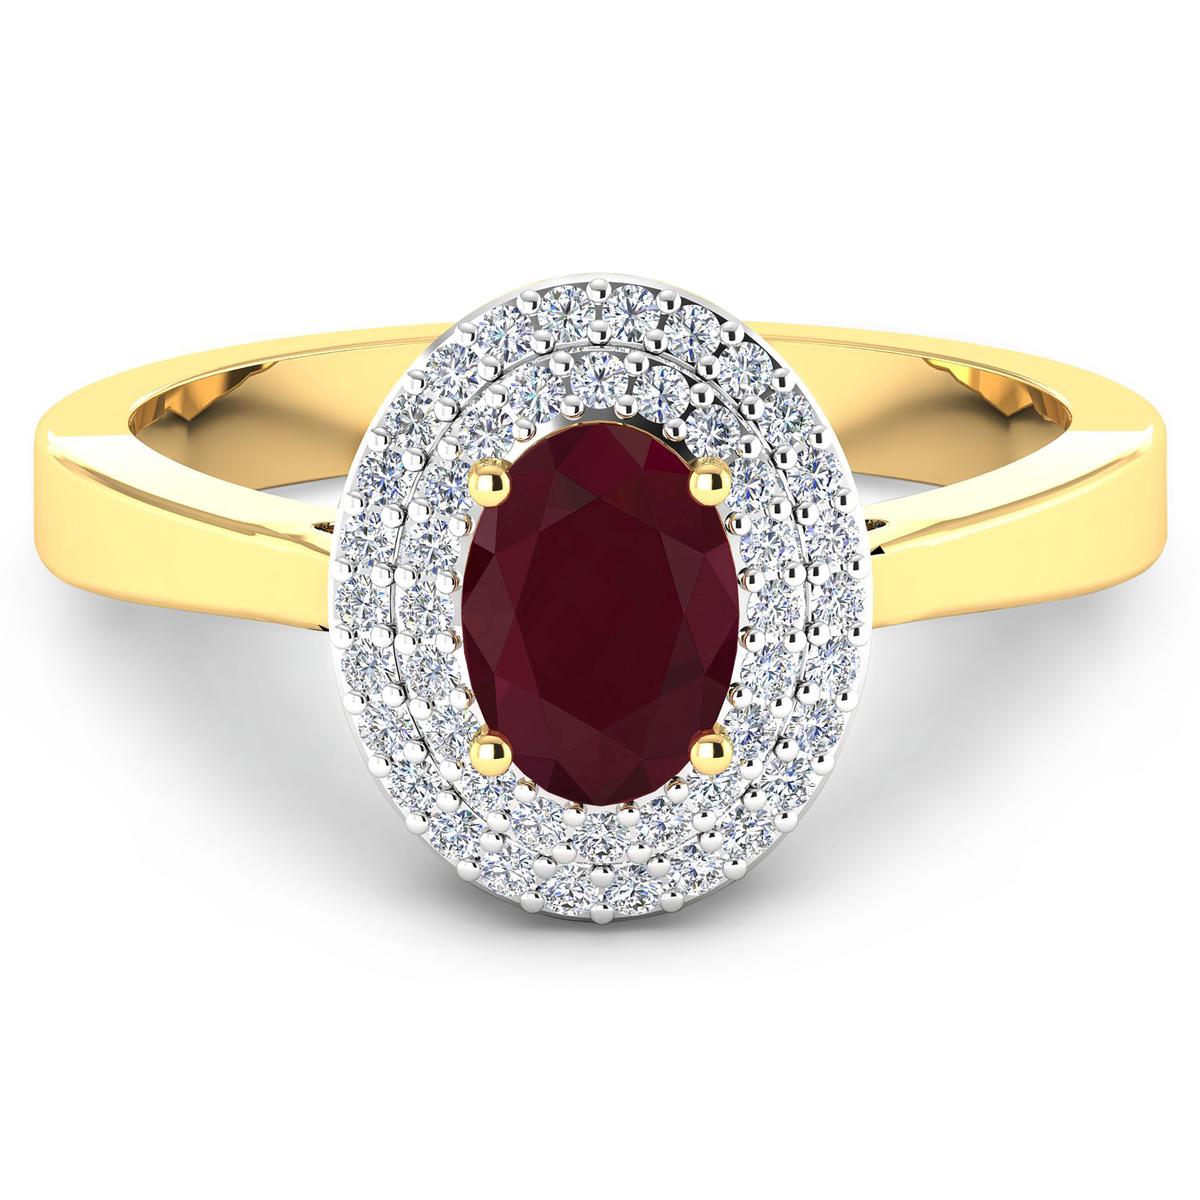 14KT Yellow Gold 0.95ct Ruby and Diamond Ring